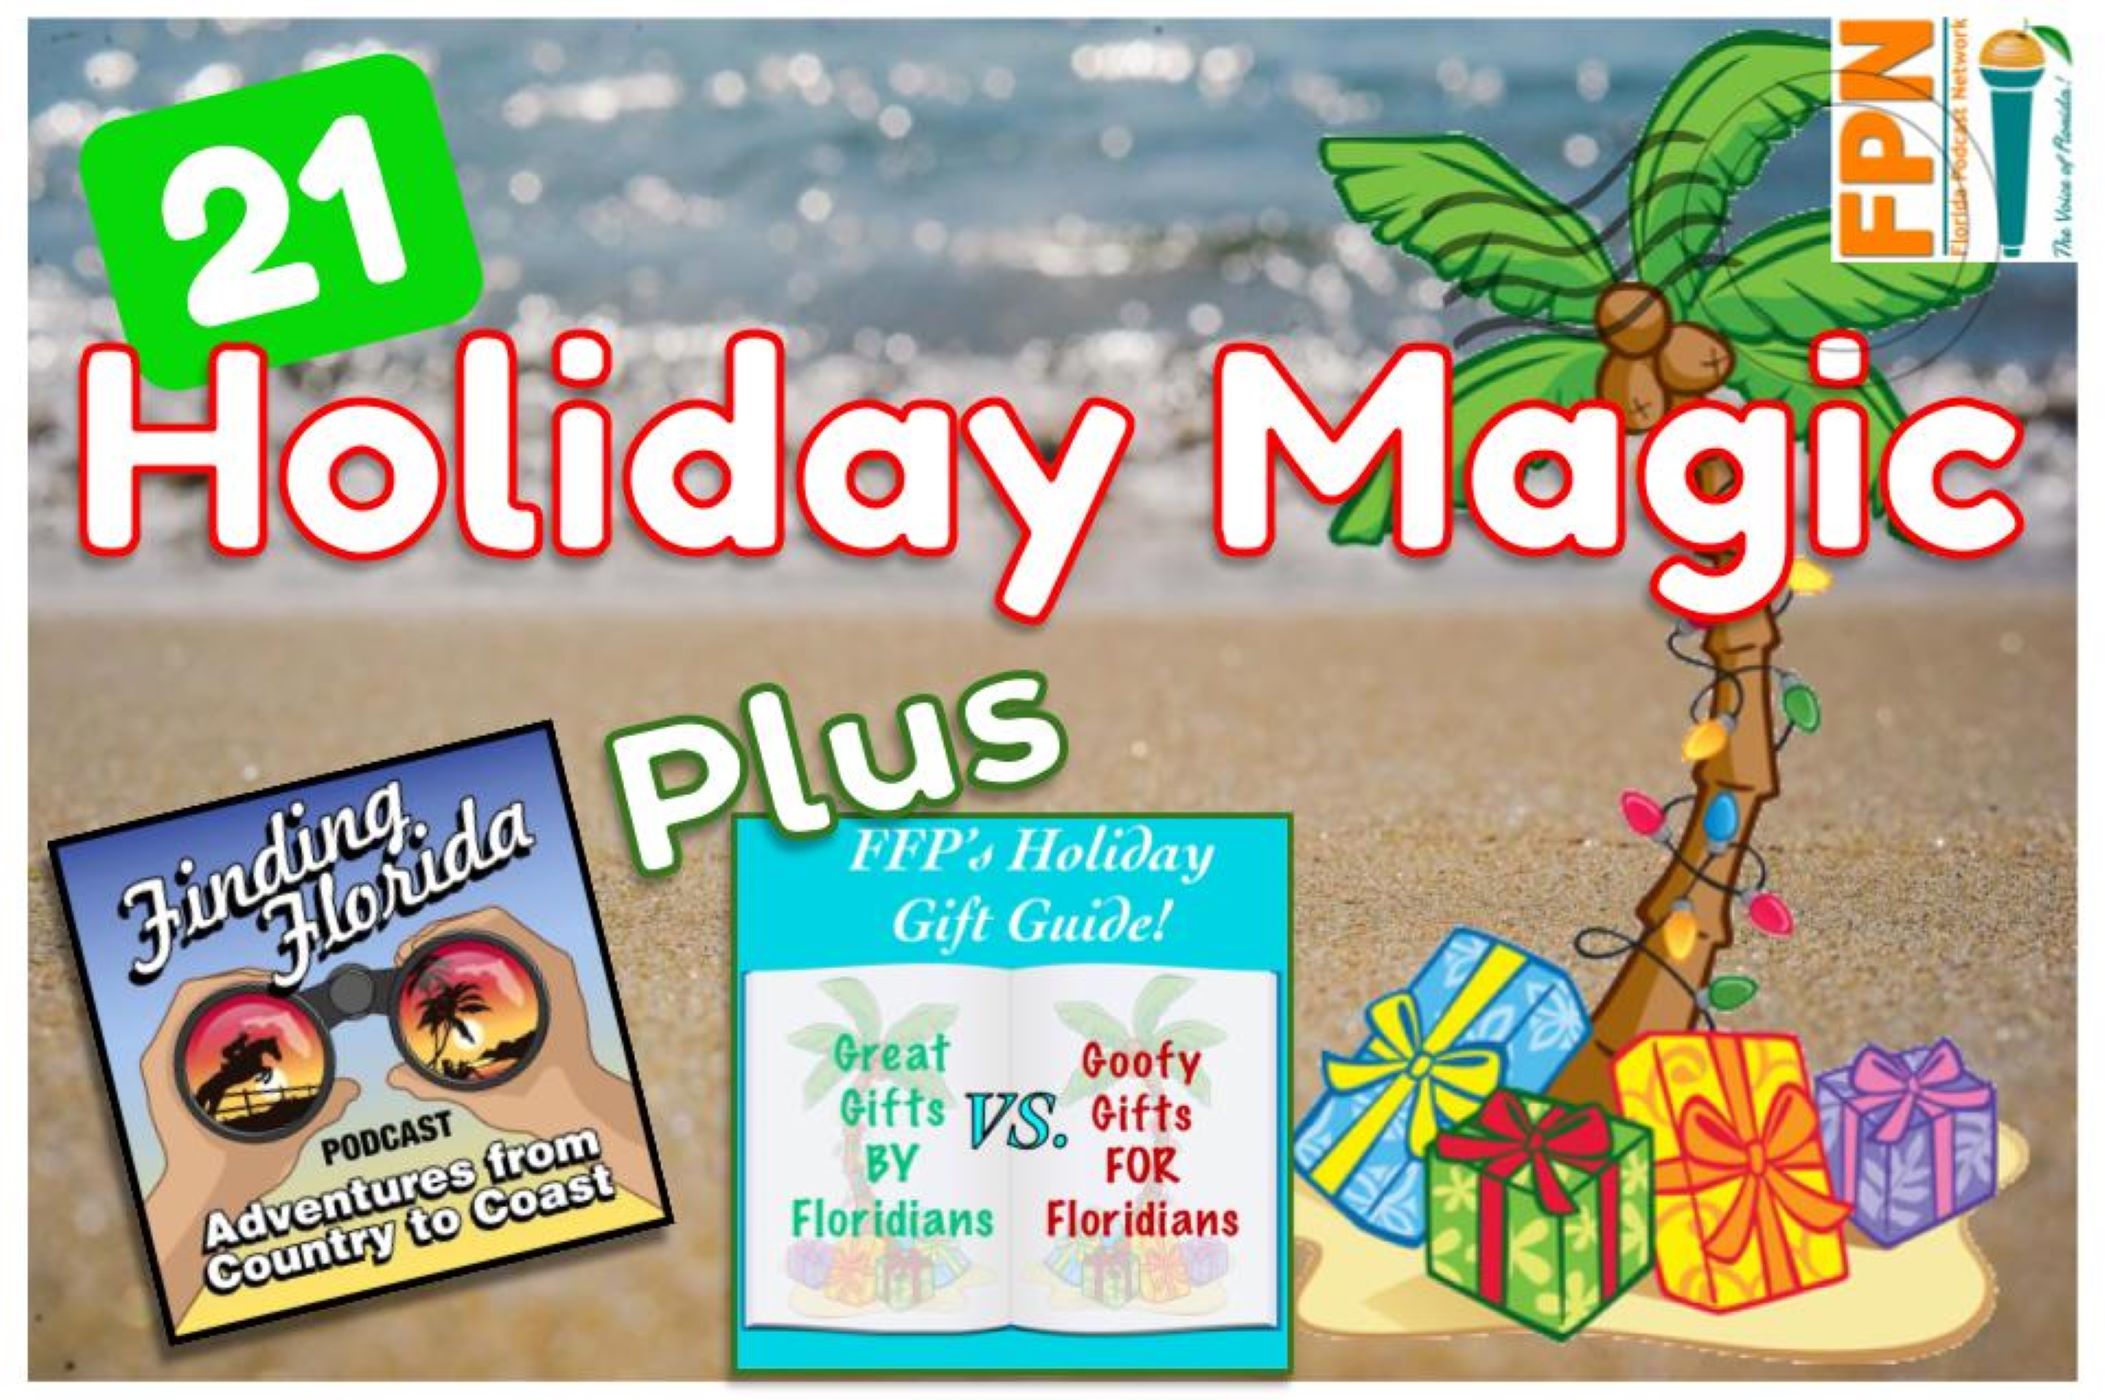 Including Great Gifts BY Floridians and Goofy Gifts FOR Floridians